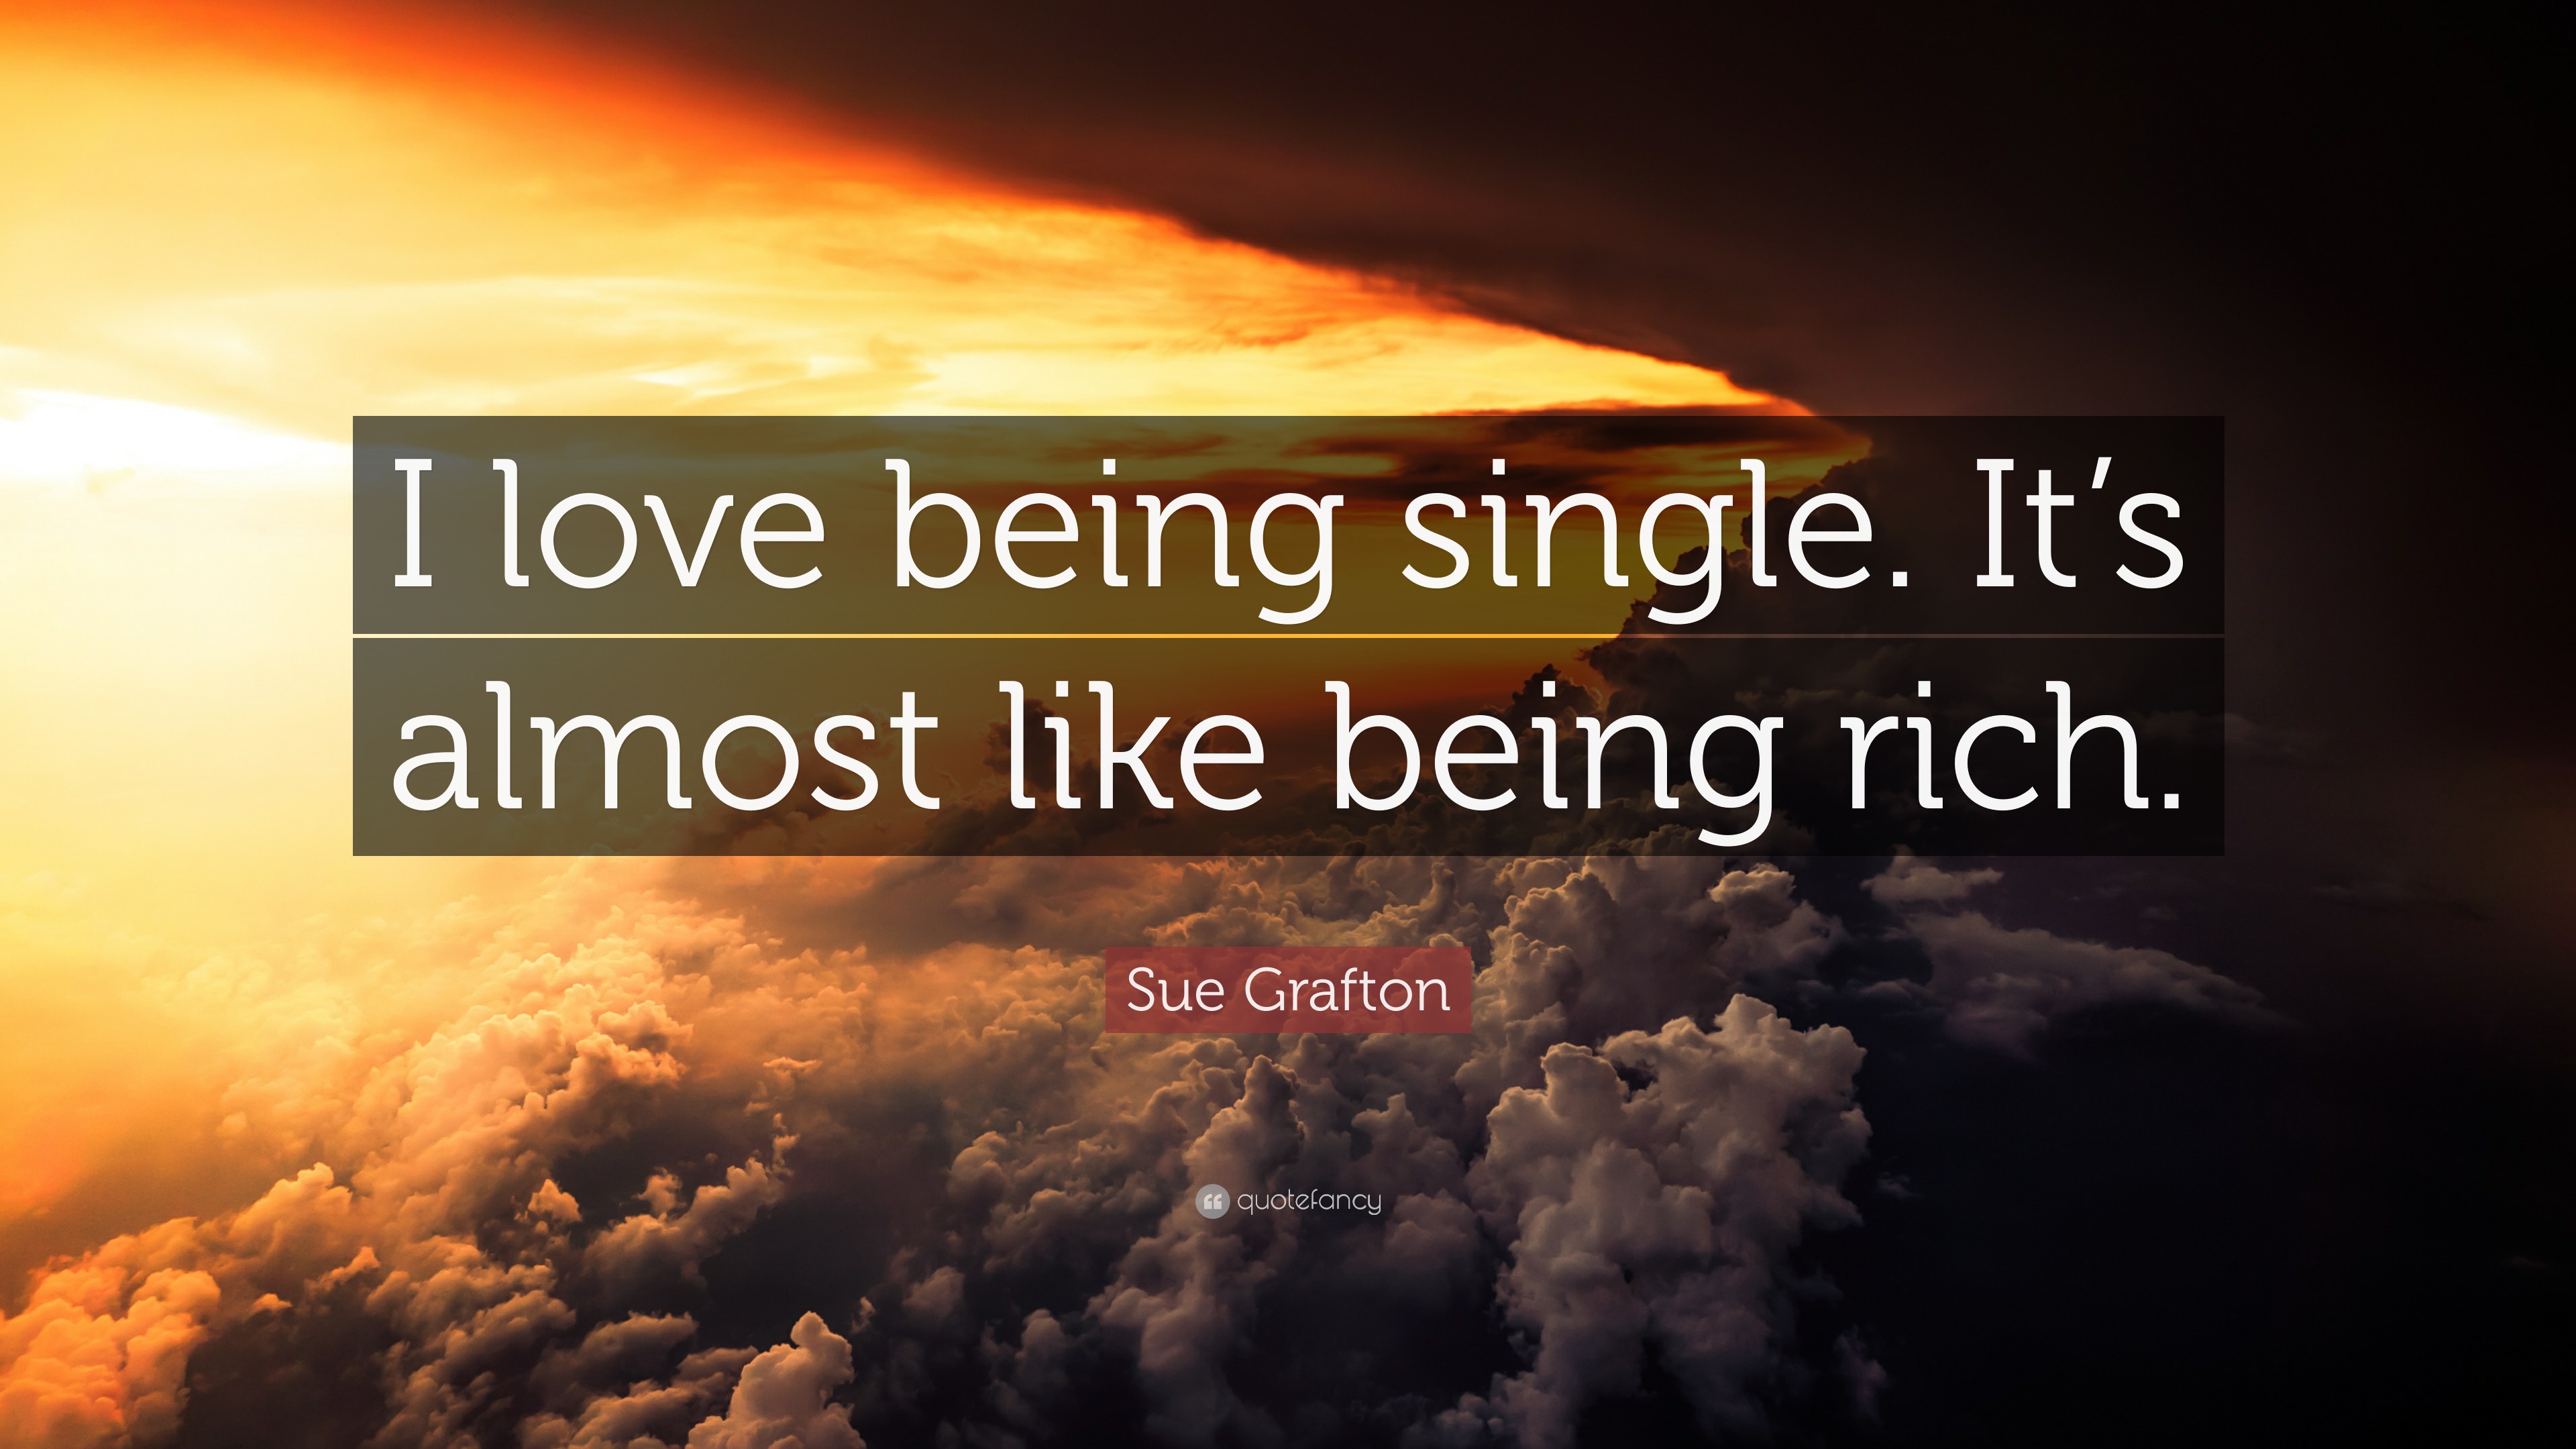 Sue Grafton Quote: "I love being single. It's almost like ...